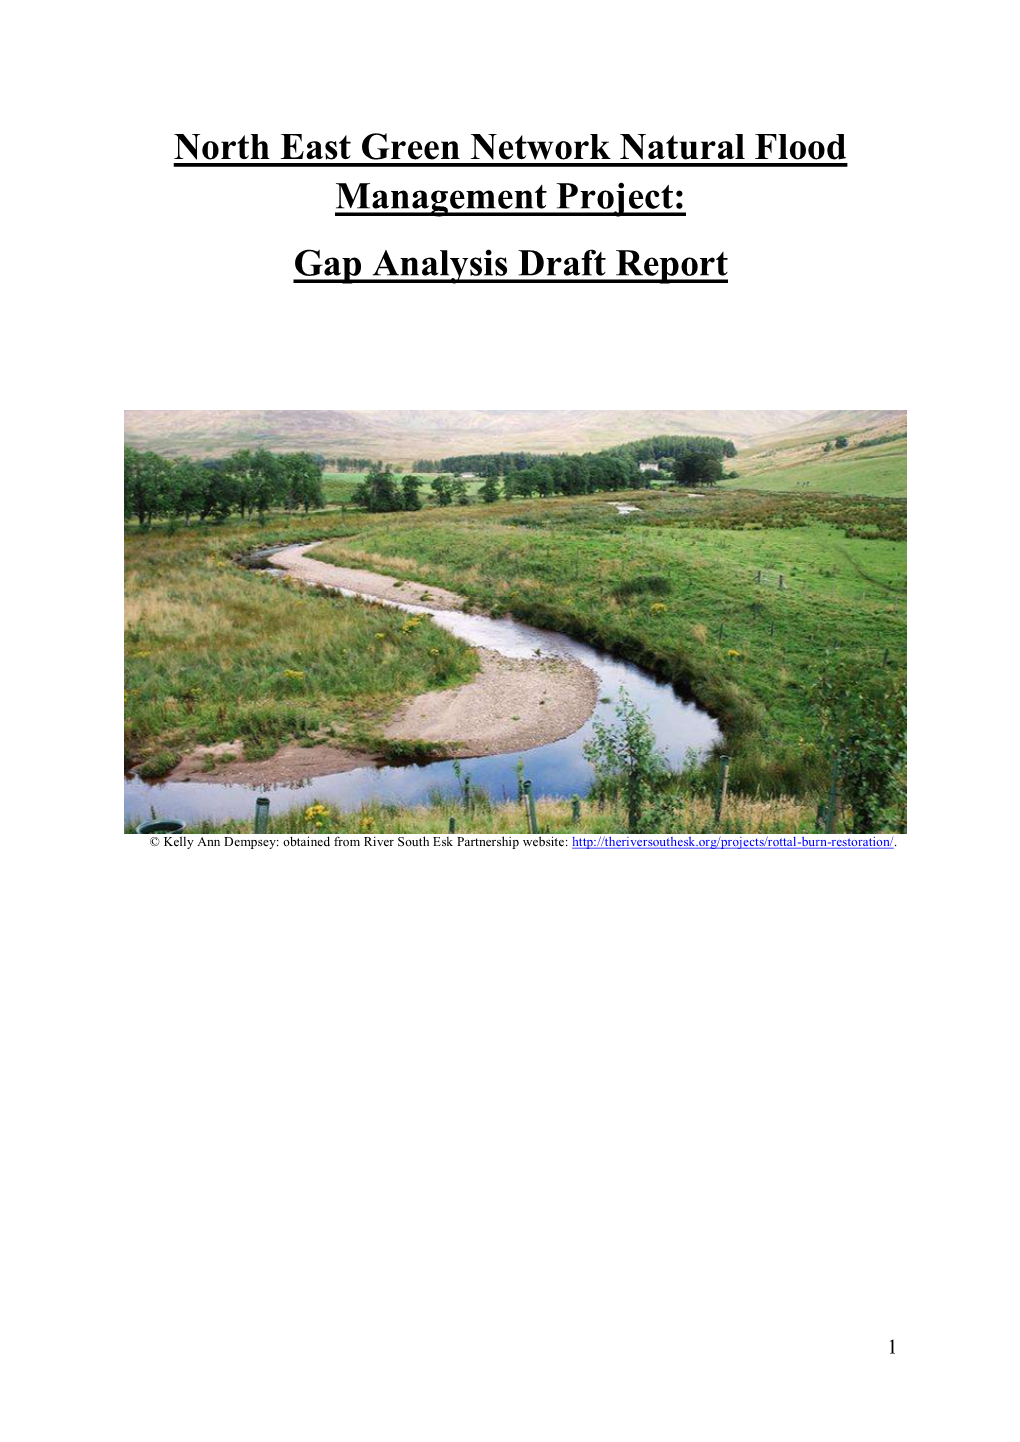 North East Green Network Natural Flood Management Project: Gap Analysis Draft Report